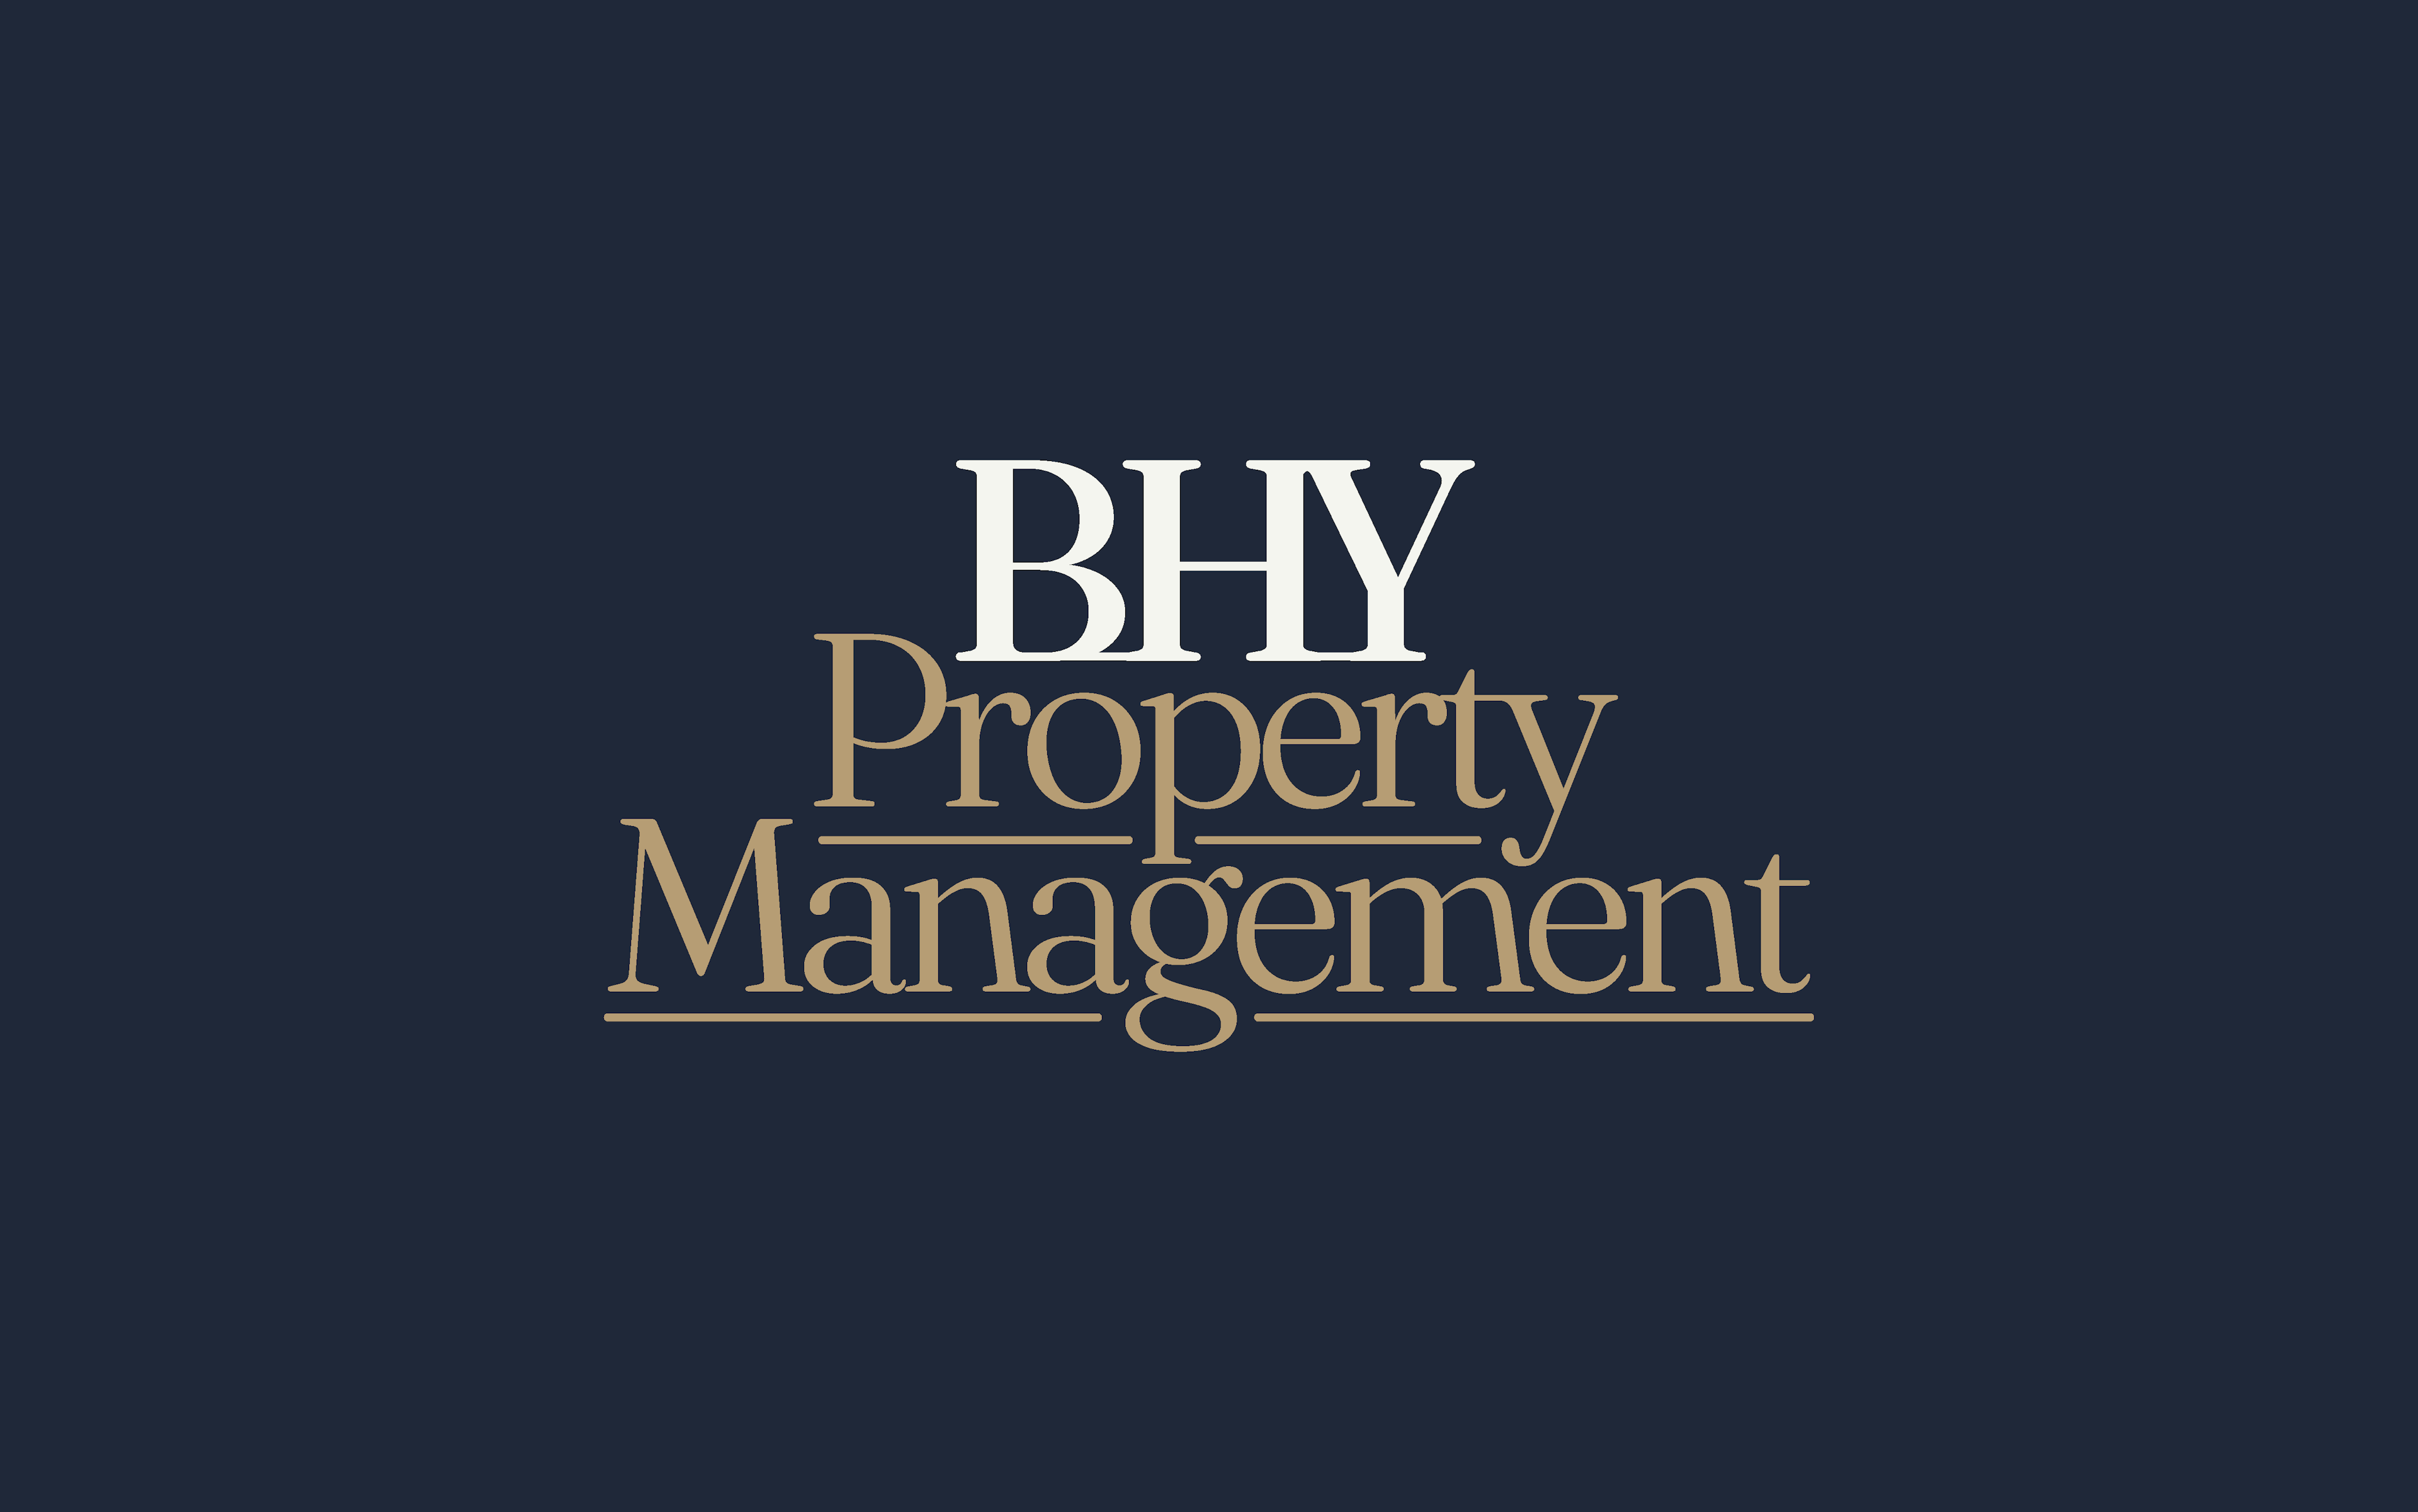 wordmark for bhy management by d7mtg, a branding agency in brooklyn